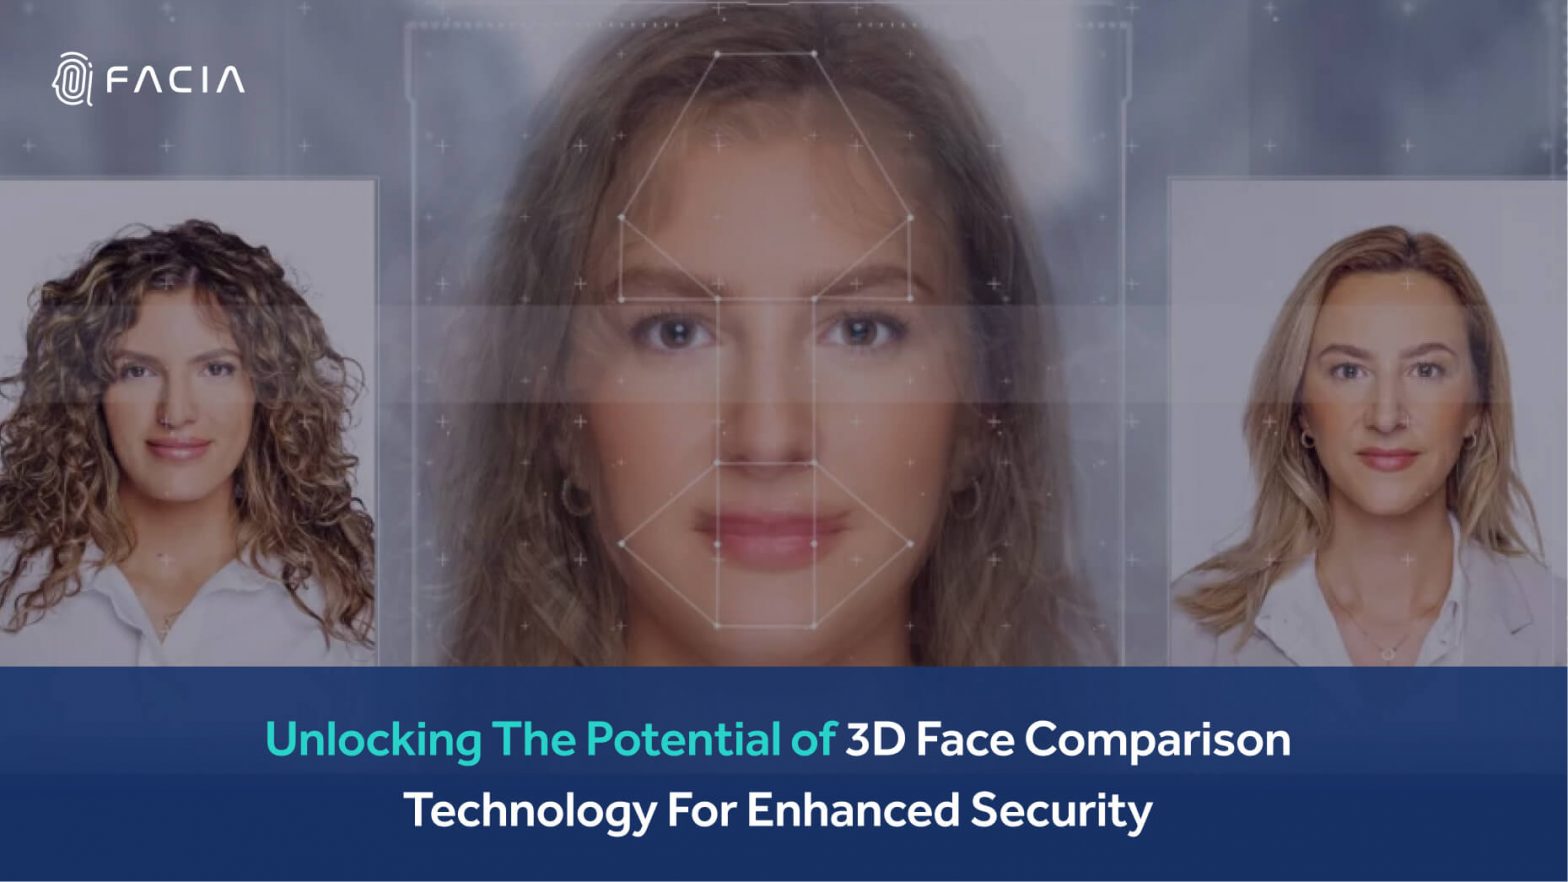 Unlocking The Potential of 3D Face Comparison Technology For Enhanced Security